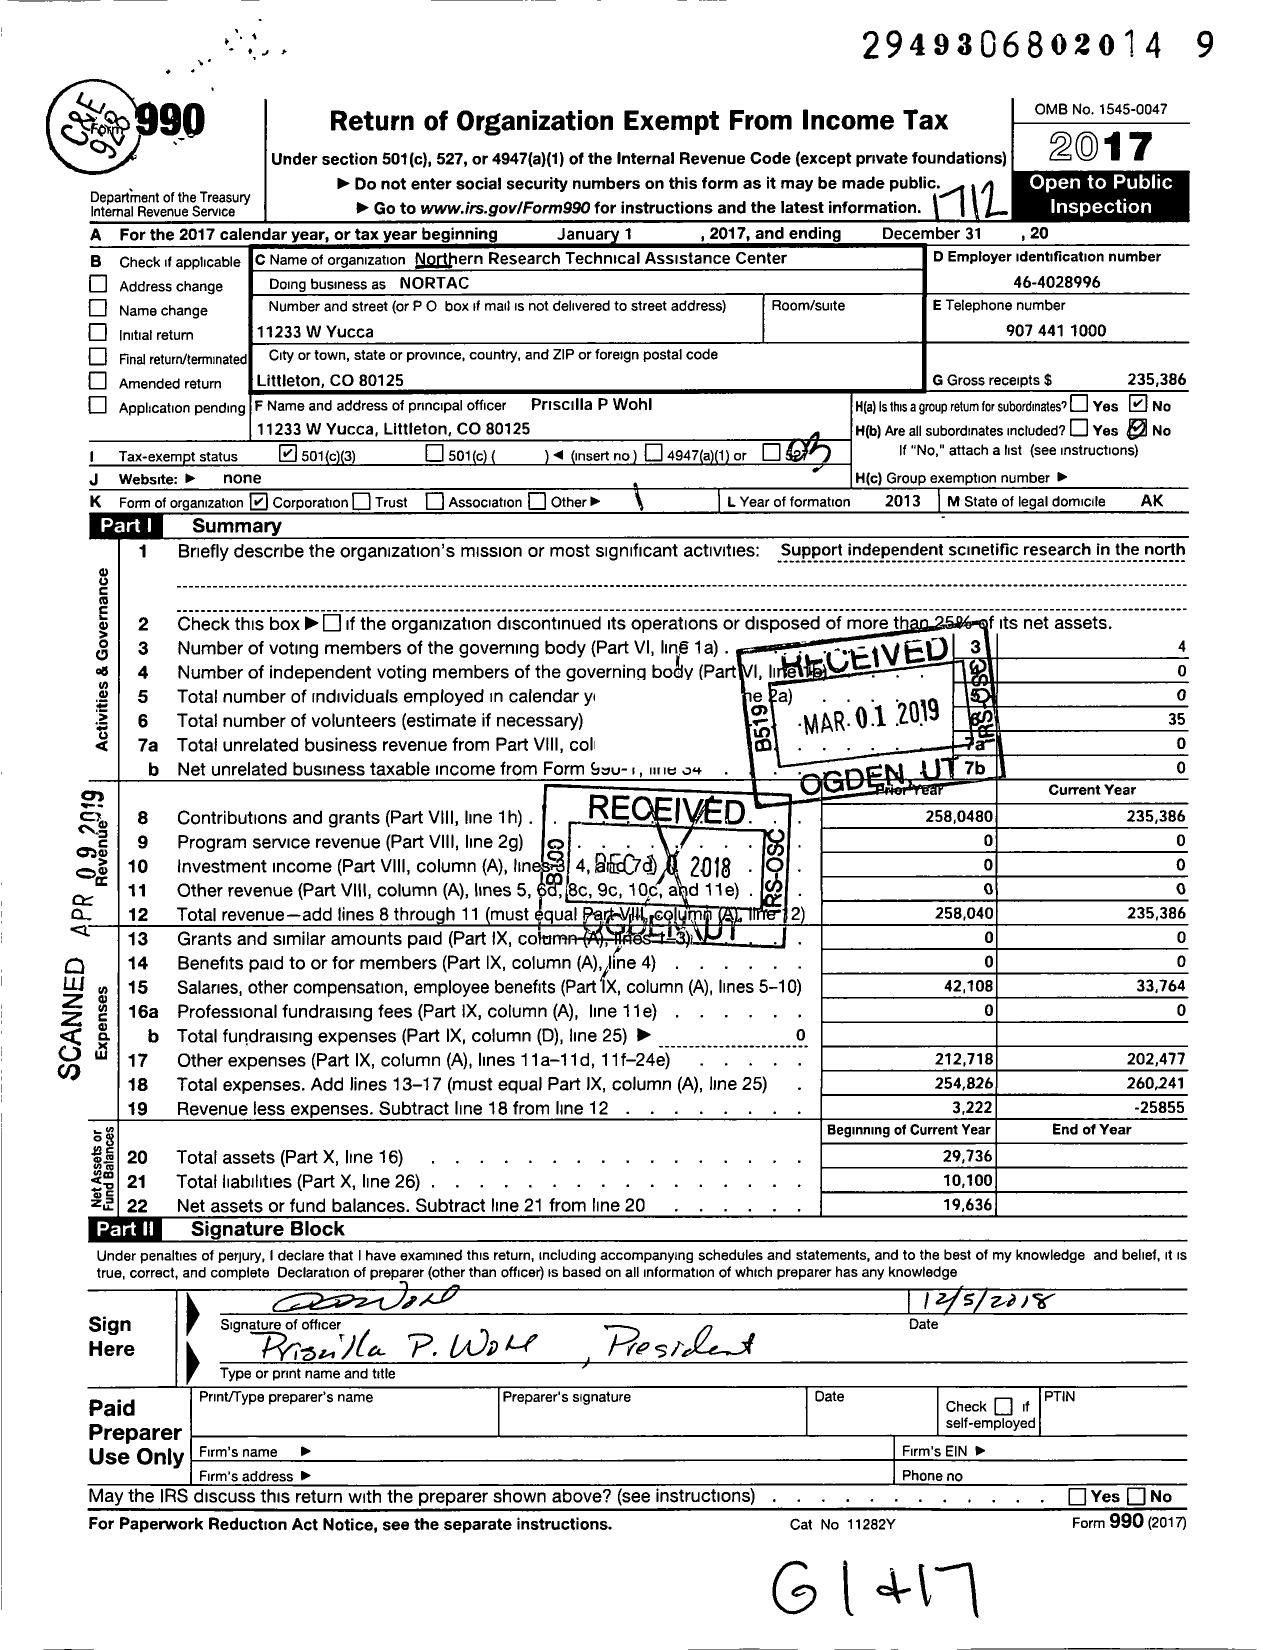 Image of first page of 2017 Form 990 for Northern Research Technical Assistance Center (NORTAC)